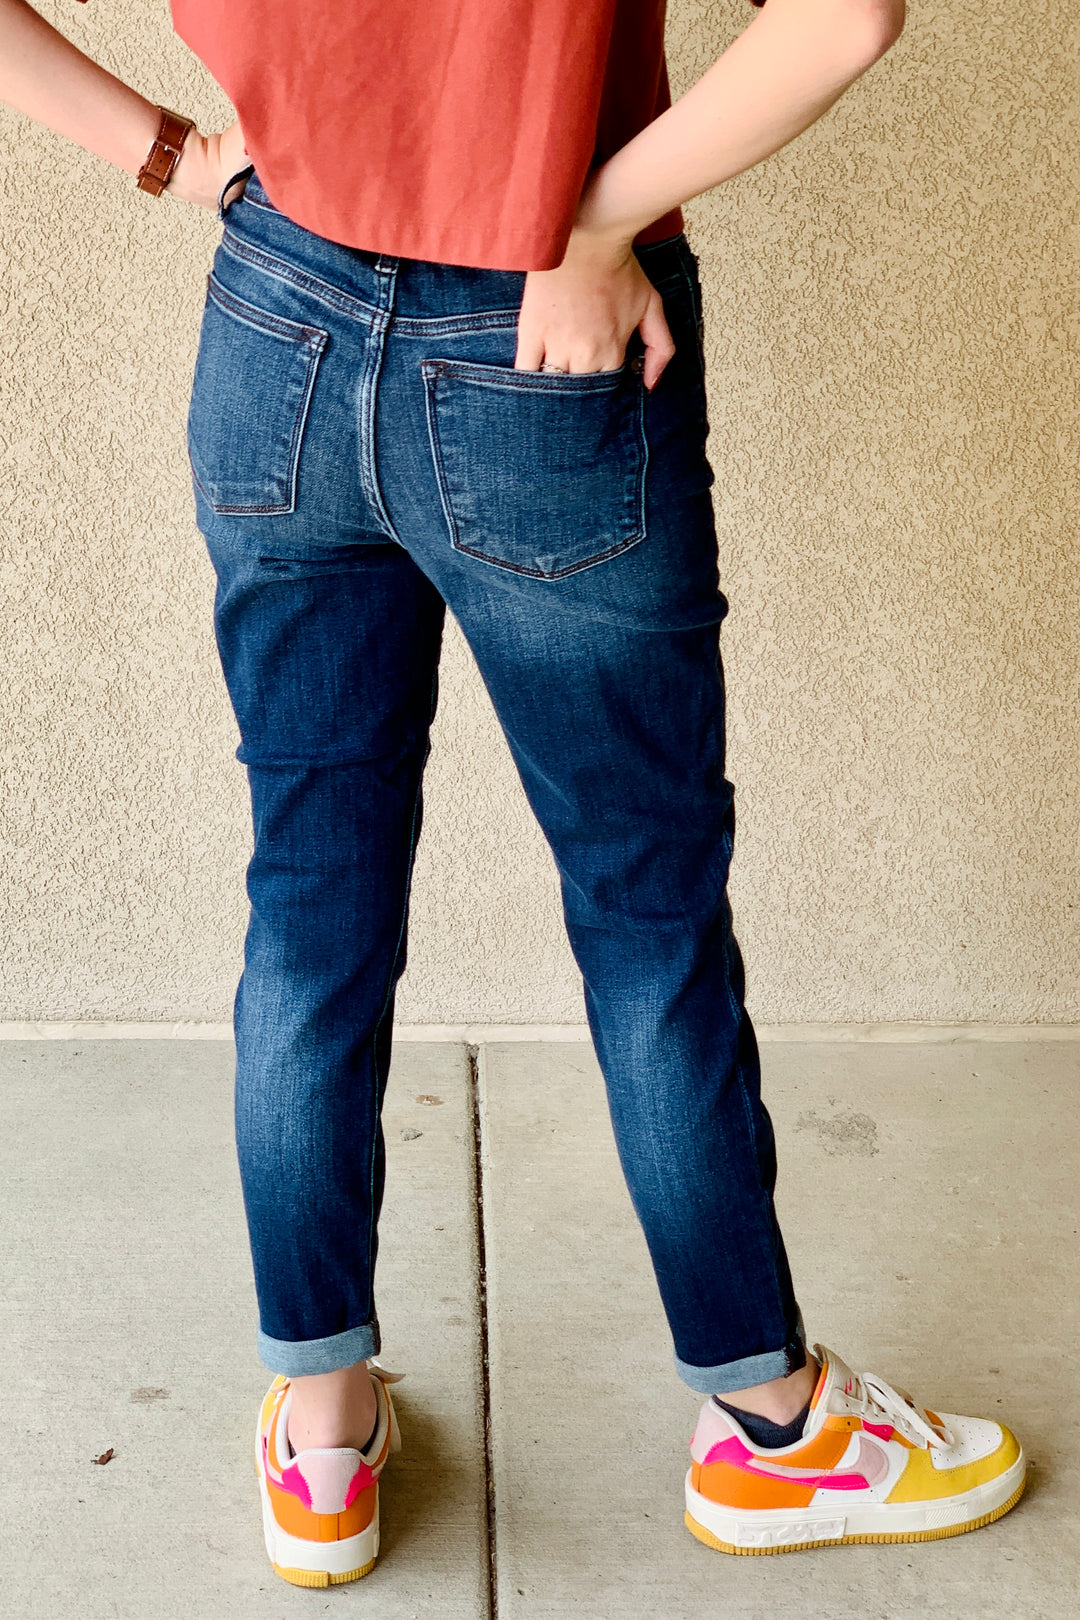 Claire Cuffed Slim Fit Jean by Judy Blue